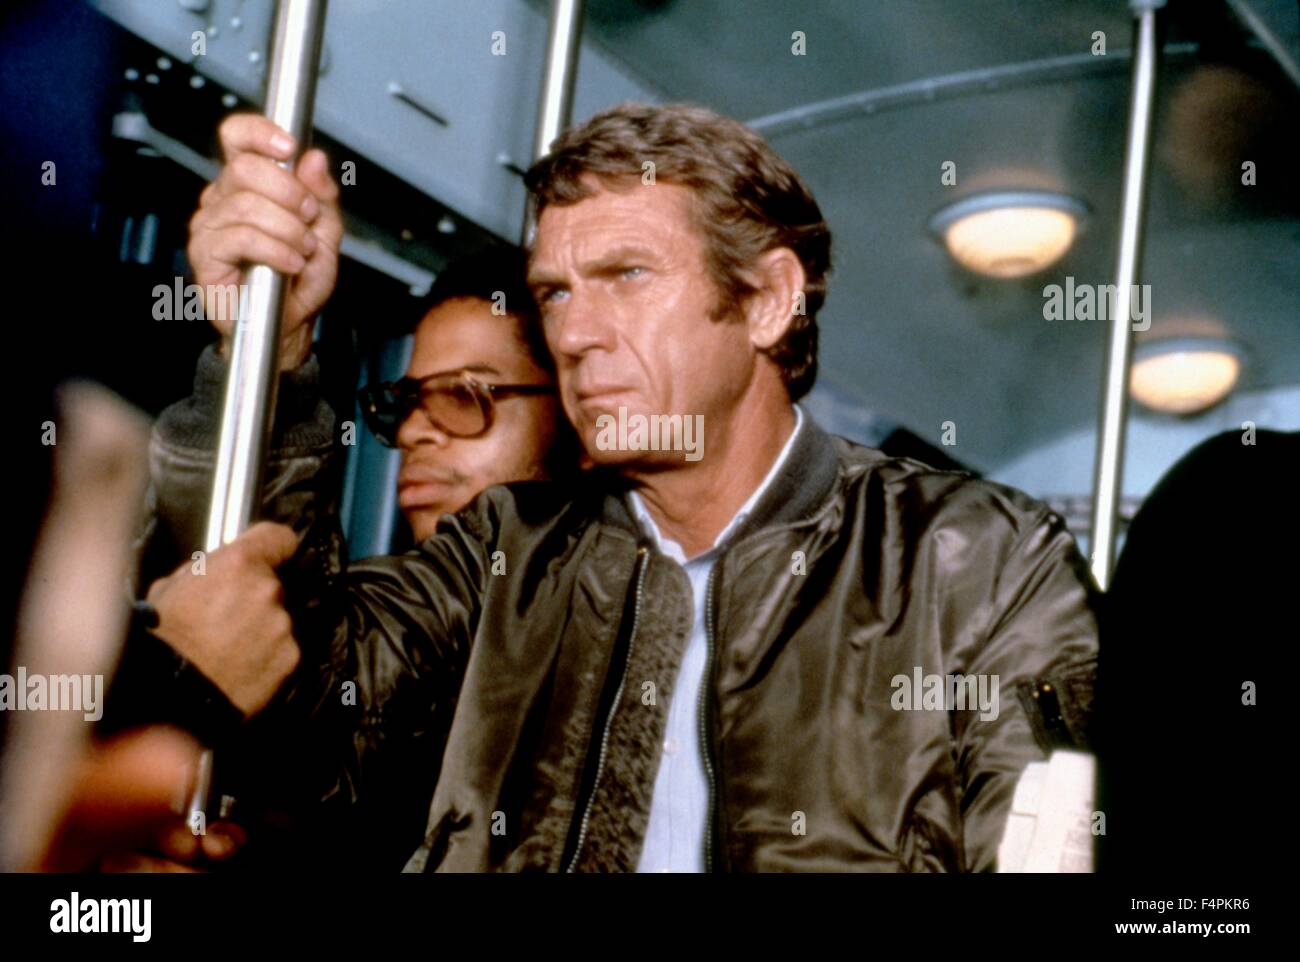 Steve McQueen / The Hunter / 1980 directed by Buzz Kulik [Paramount Pictures] Stock Photo